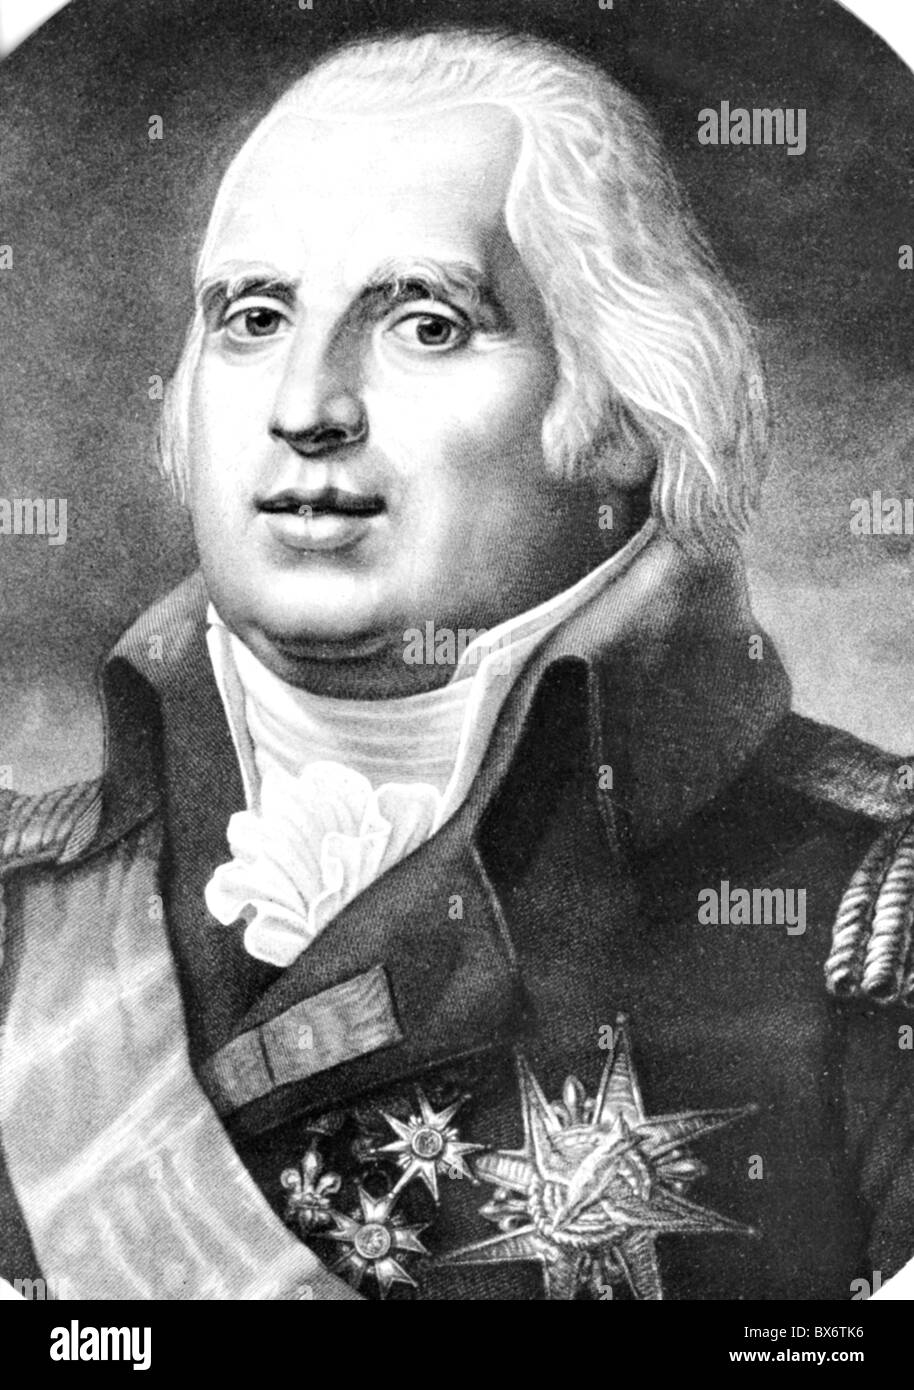 Louis XVIII, 17.11.1755 - 16.9.1824, King of France 2.4.1814 - 16.9.1824, portrait, steel engraving by Bertrand after drawing by Baquet, 19th century, Artist's Copyright has not to be cleared Stock Photo